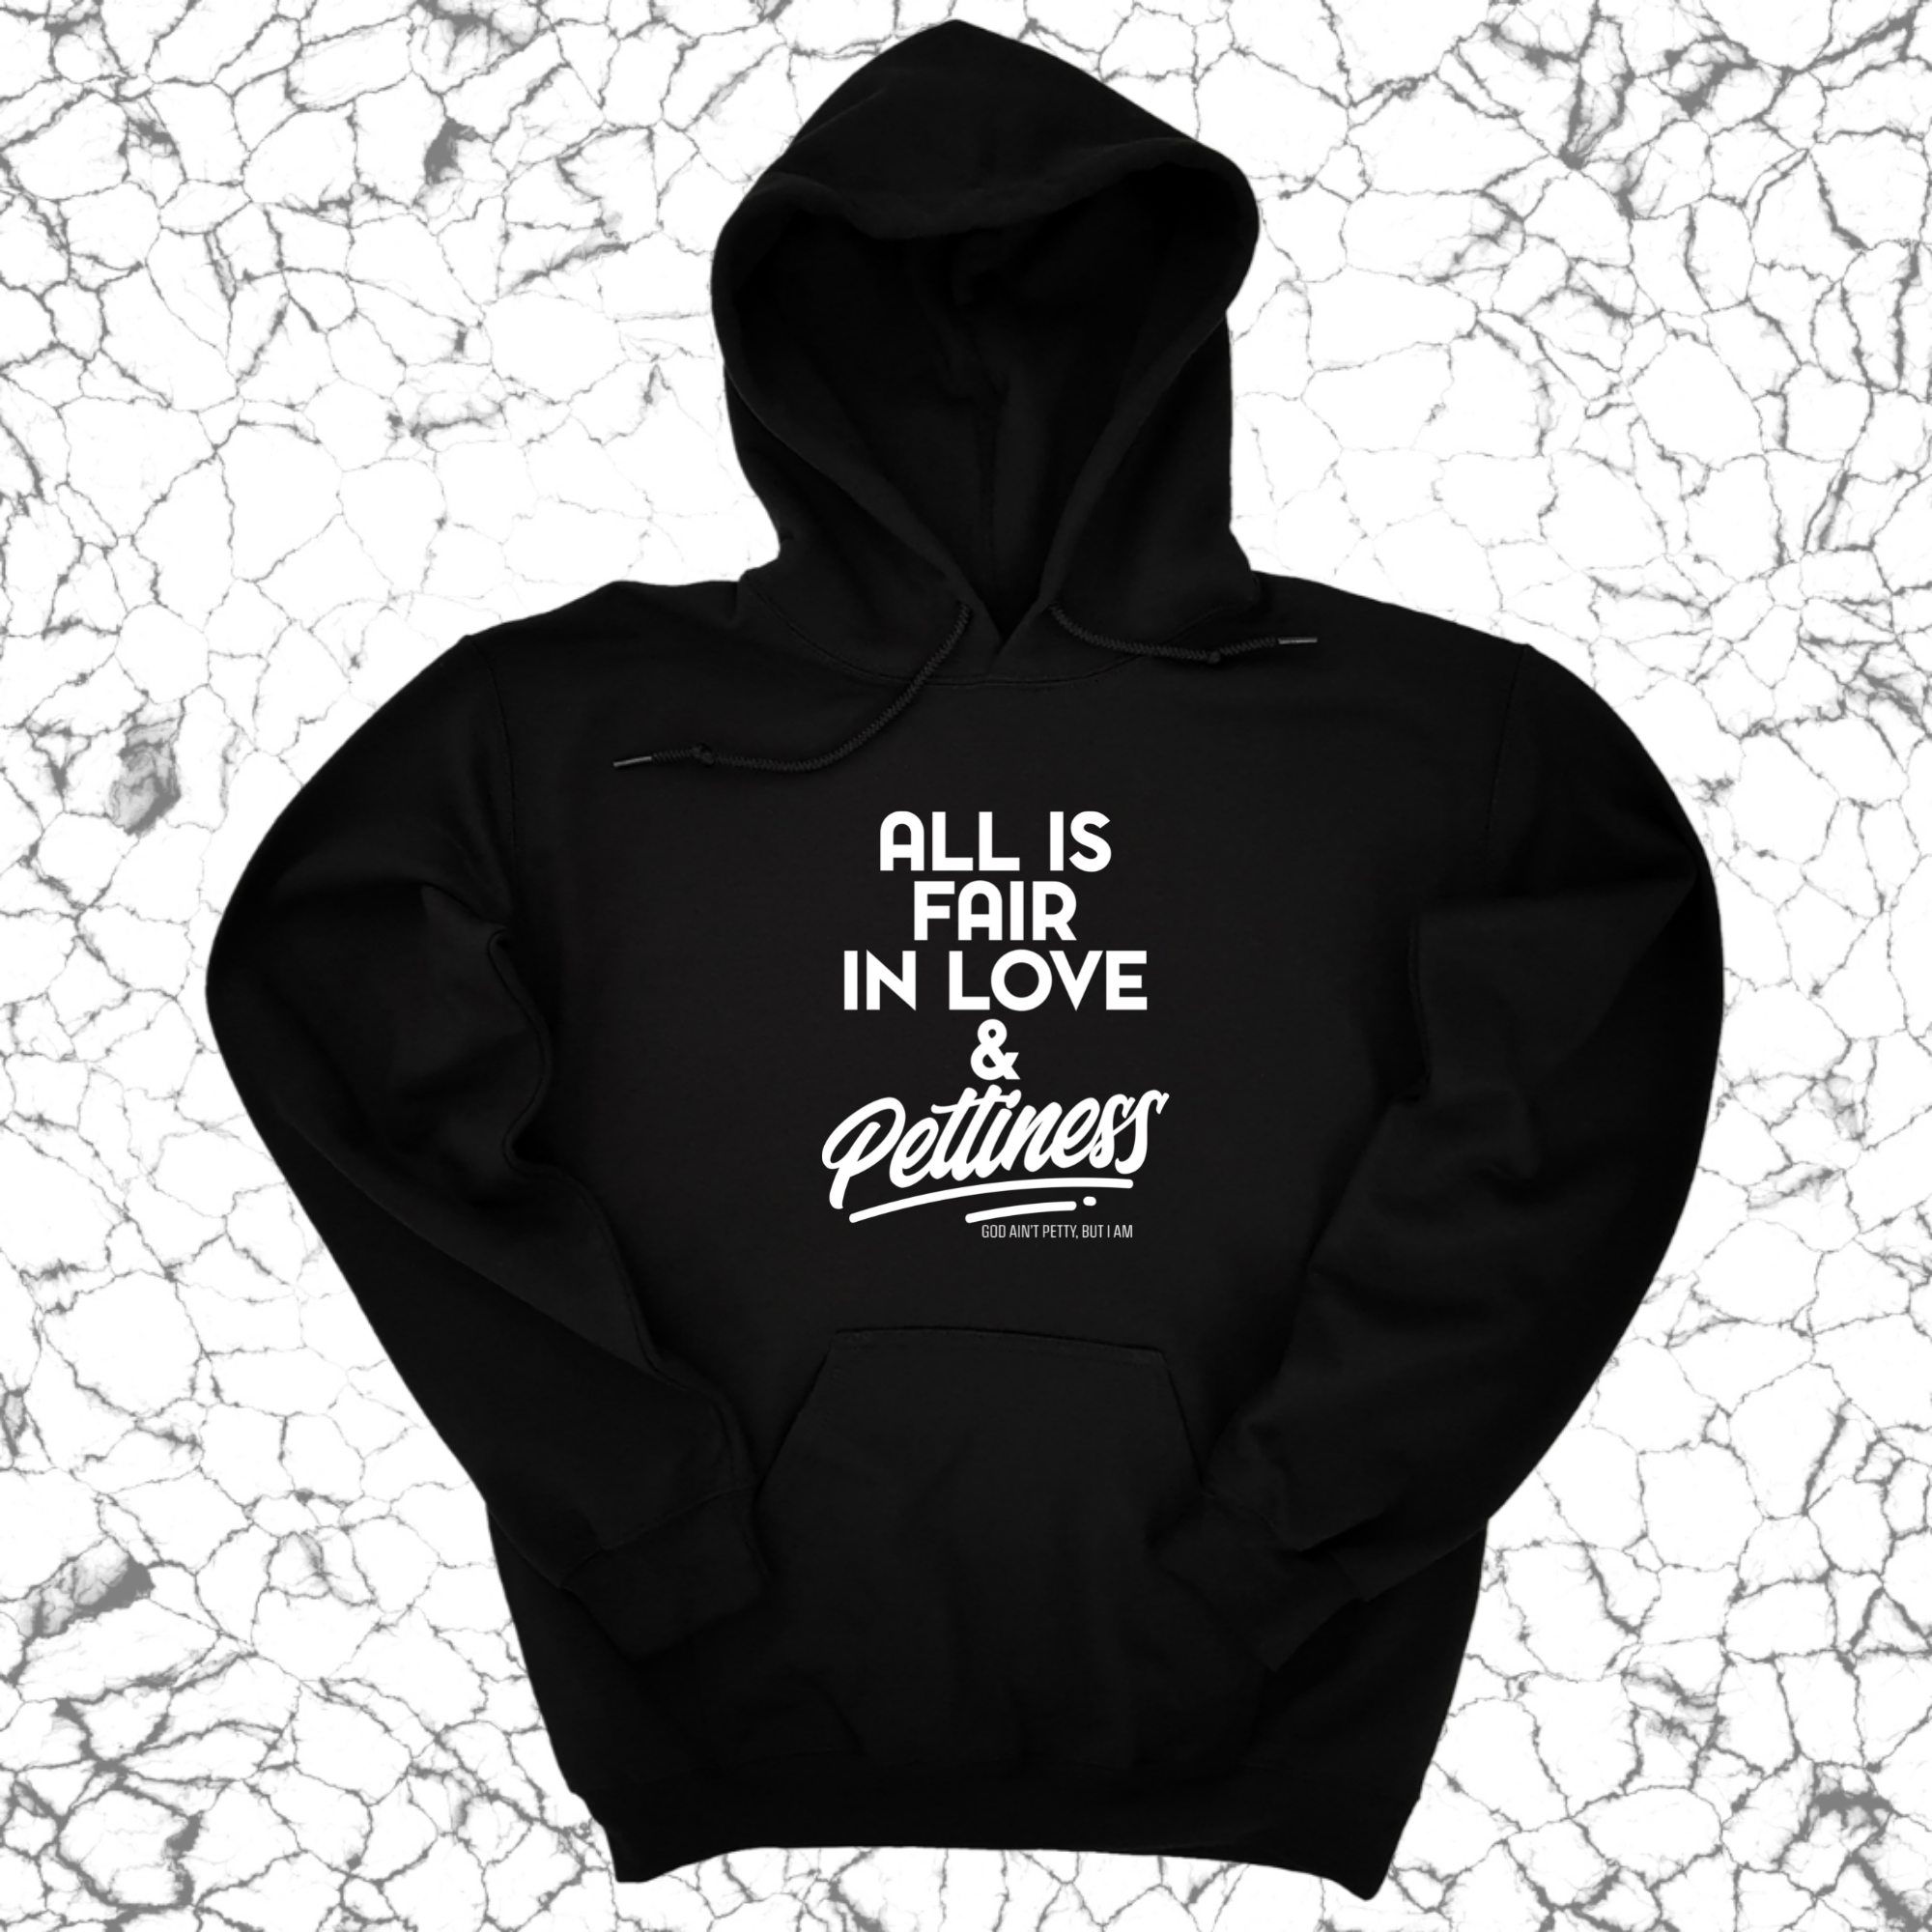 All is Fair in Love & Pettiness Unisex Hoodie-Hoodie-The Original God Ain't Petty But I Am